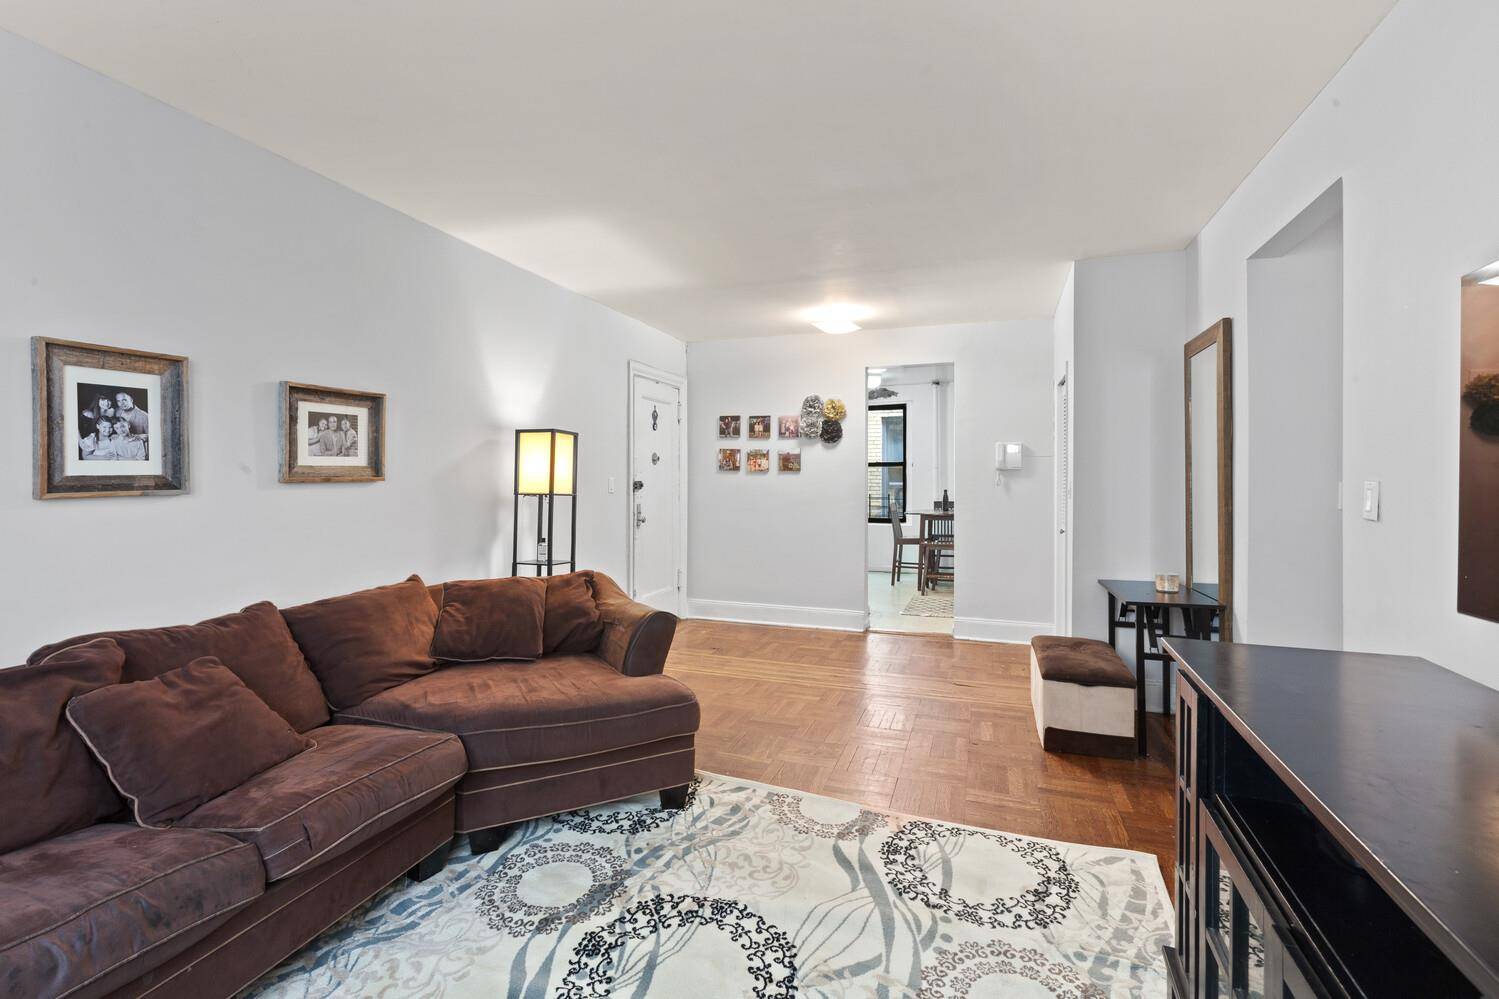 Charming 2 Bedroom apartment is the perfect apartment for the homeowner who wants the chance to create a home that reflects their own personality and taste.